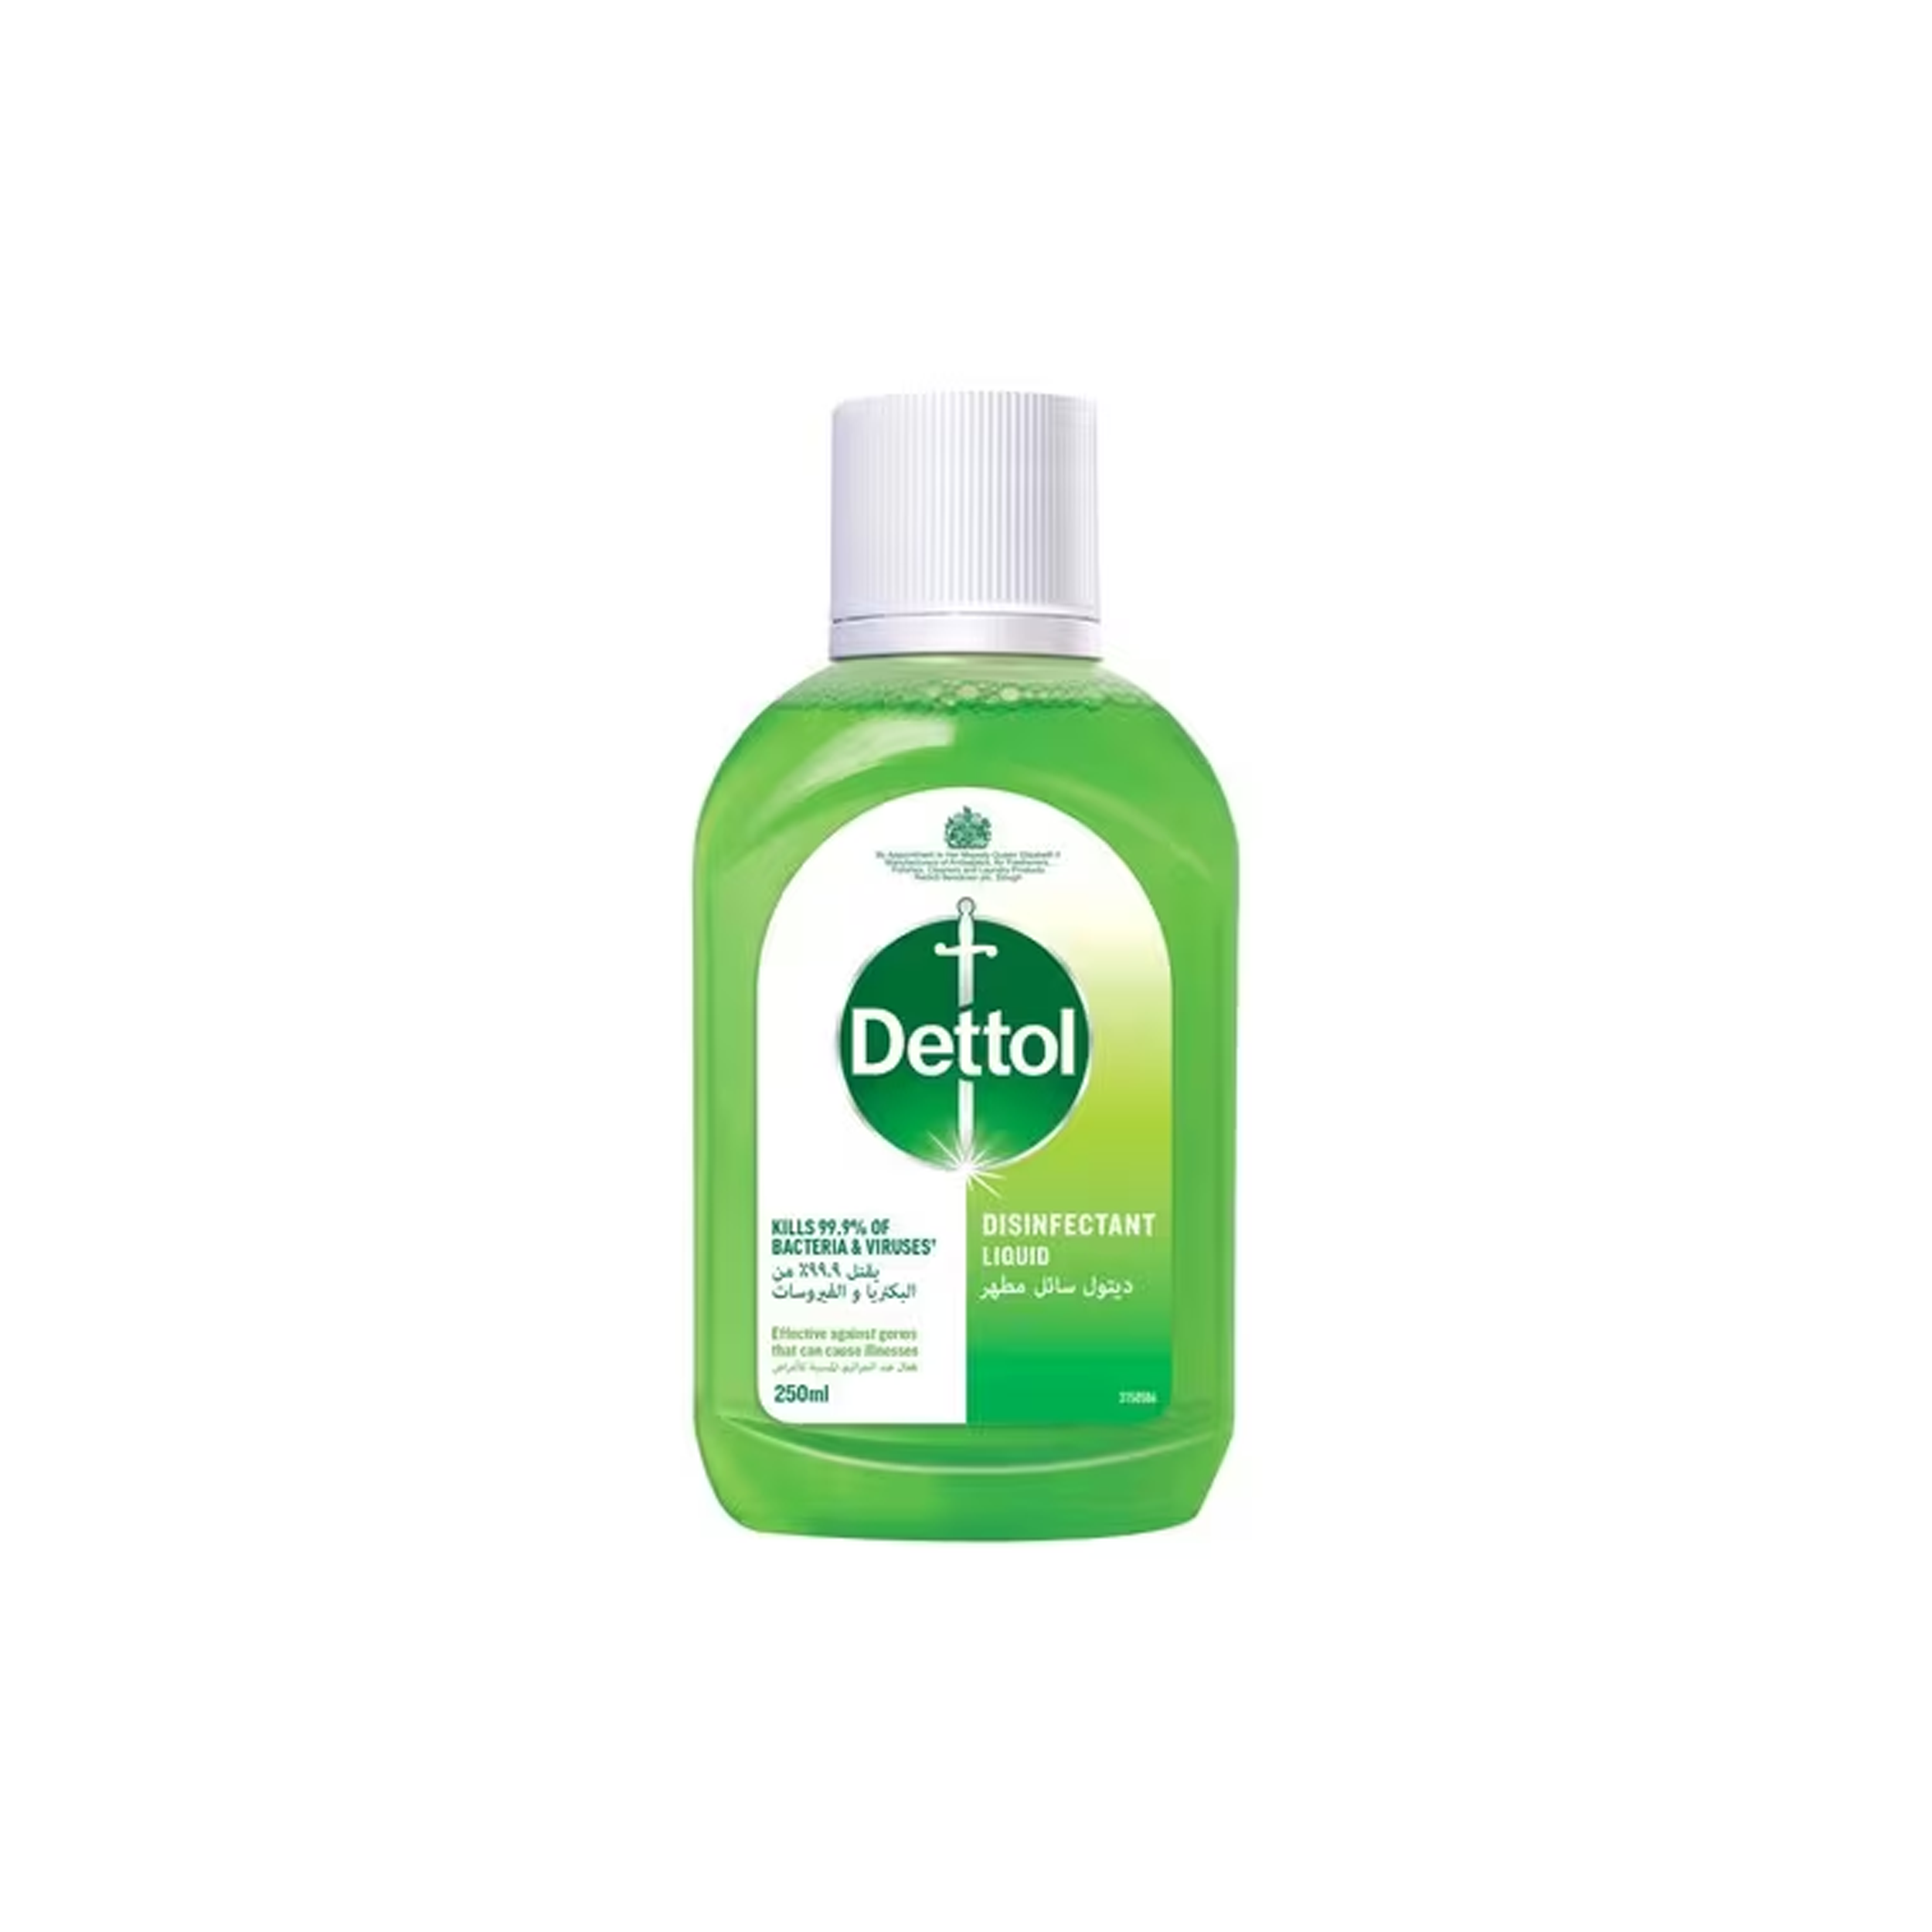 DETTOL PERS. CARE 250ML